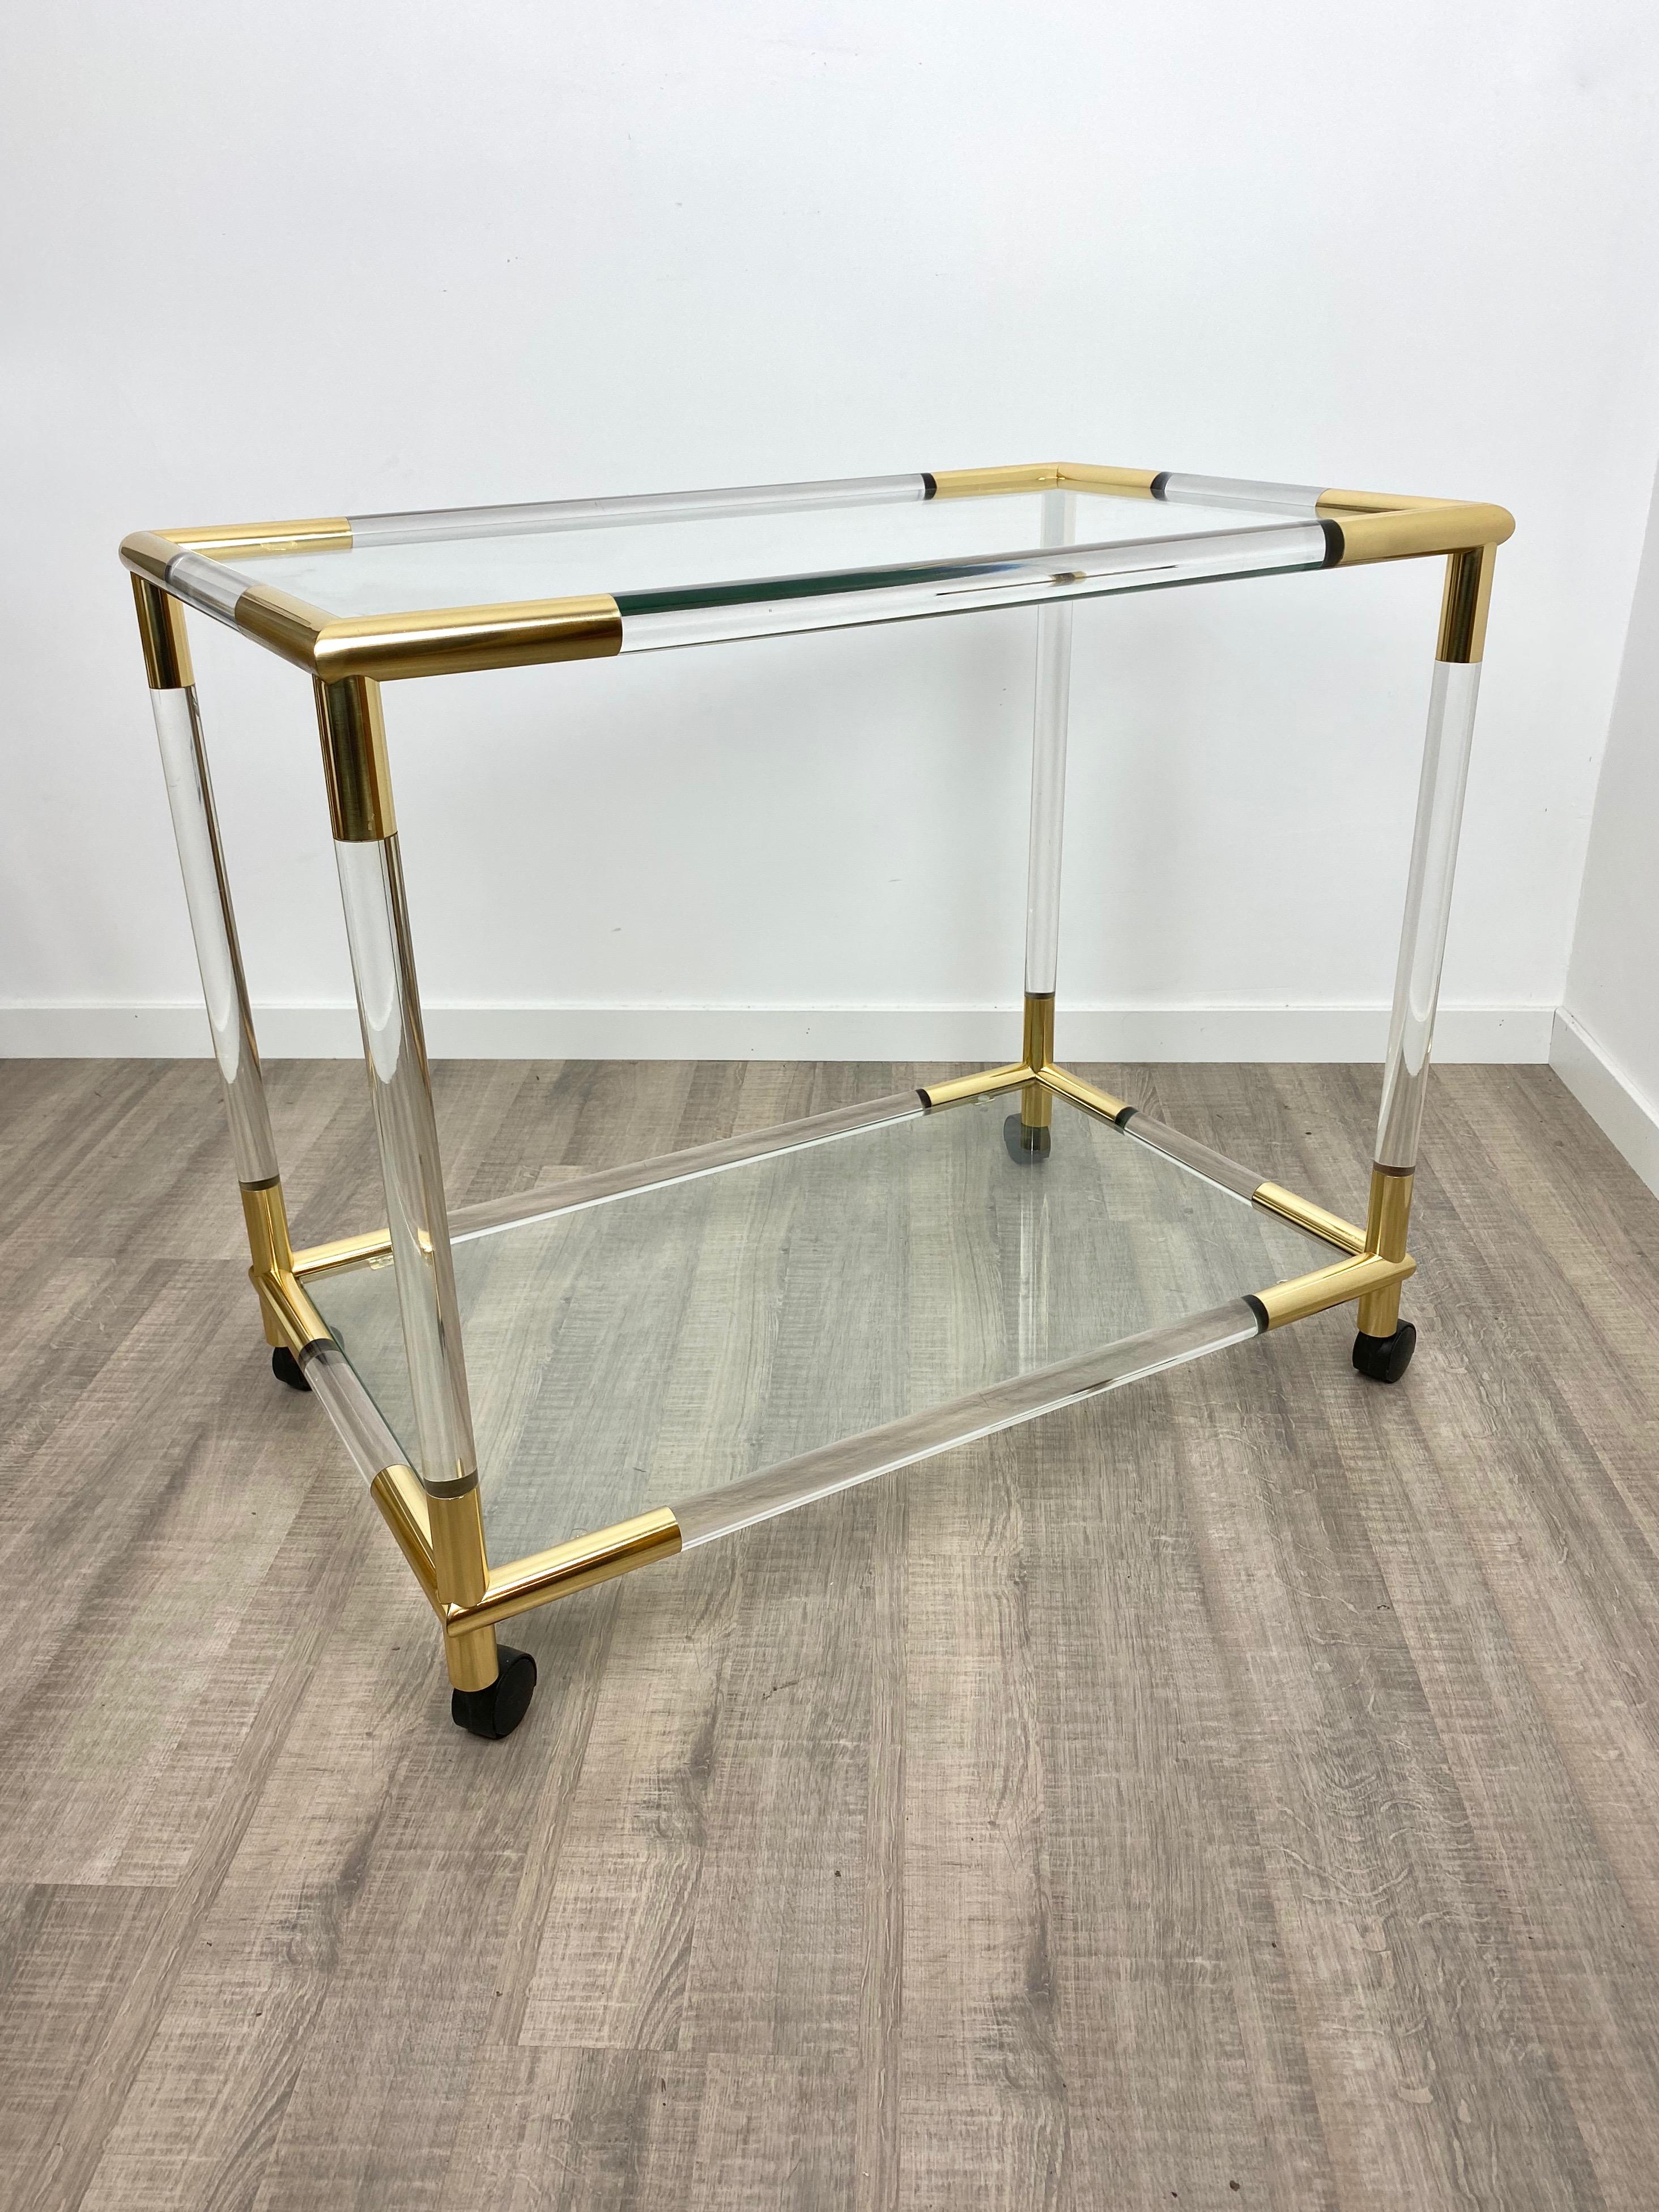 Lucite, Brass and Glass Bar Serving Cart Trolley, Italy, 1970s In Good Condition For Sale In Rome, IT